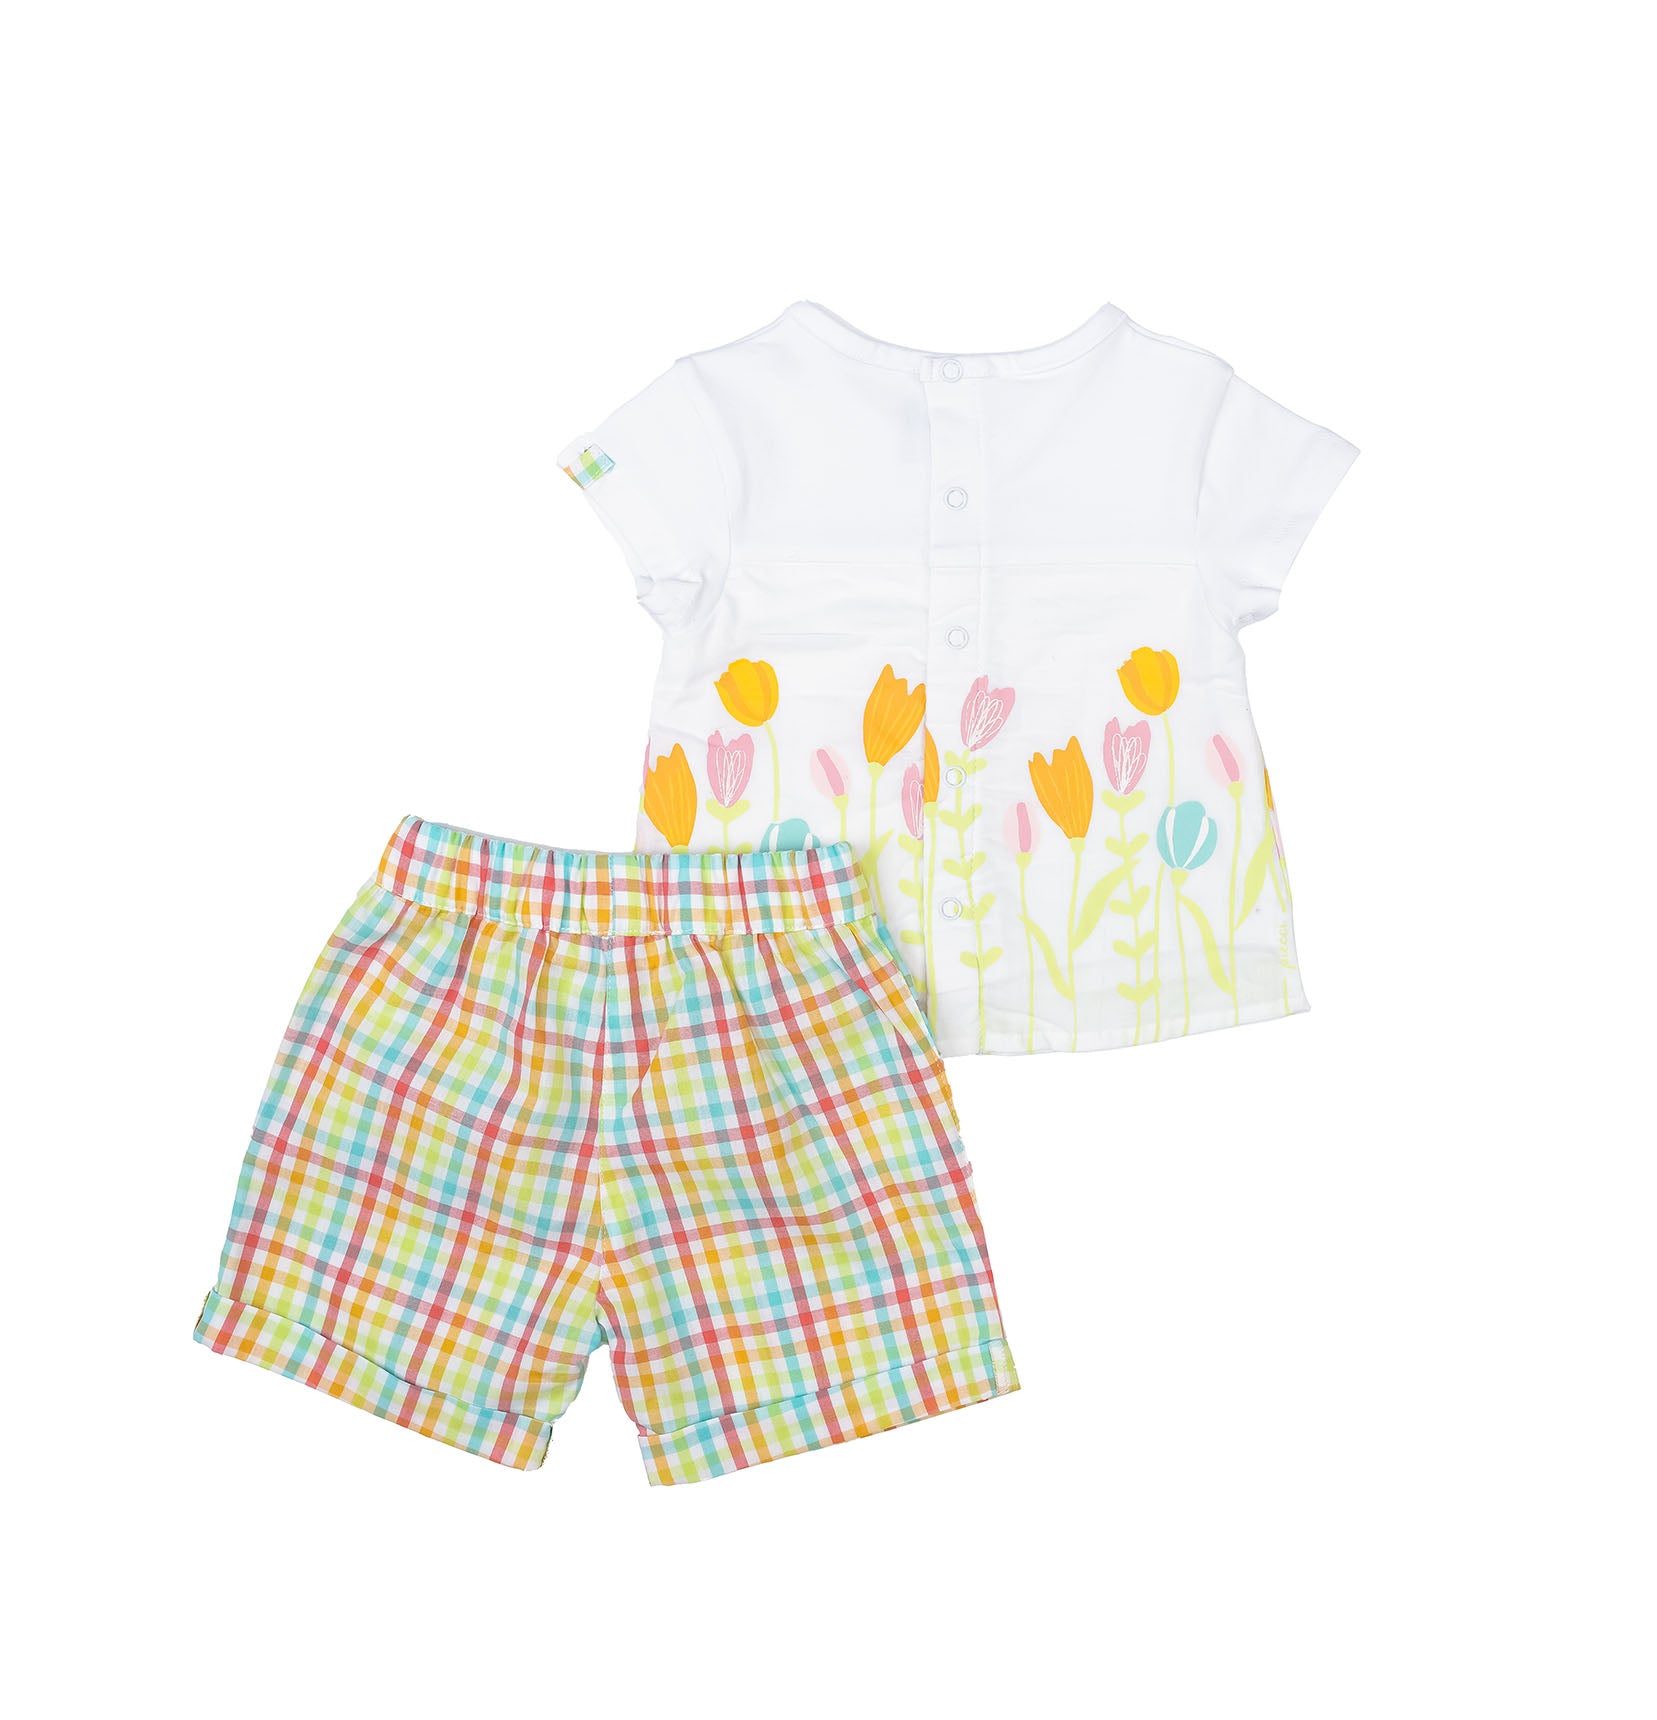 Baby girl patterned set by Pompelo